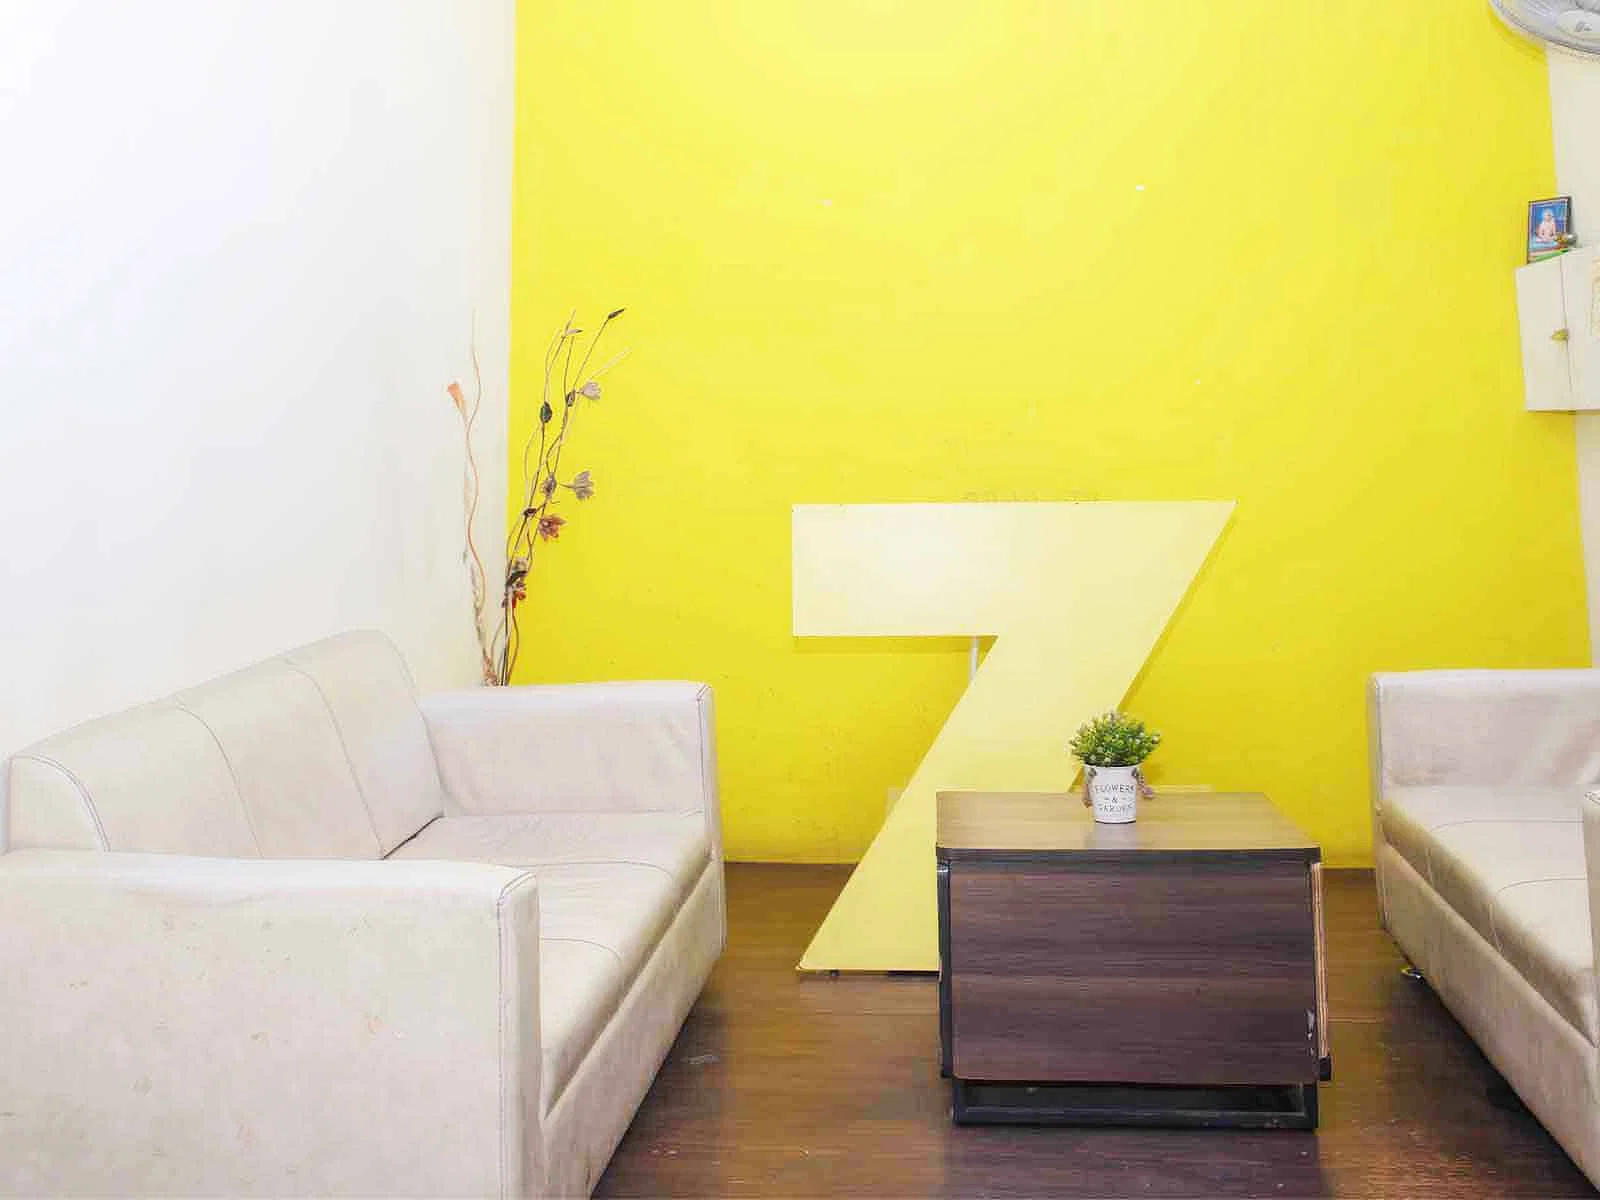 budget-friendly PGs and hostels for unisex with single rooms with daily hopusekeeping-Zolo Altius